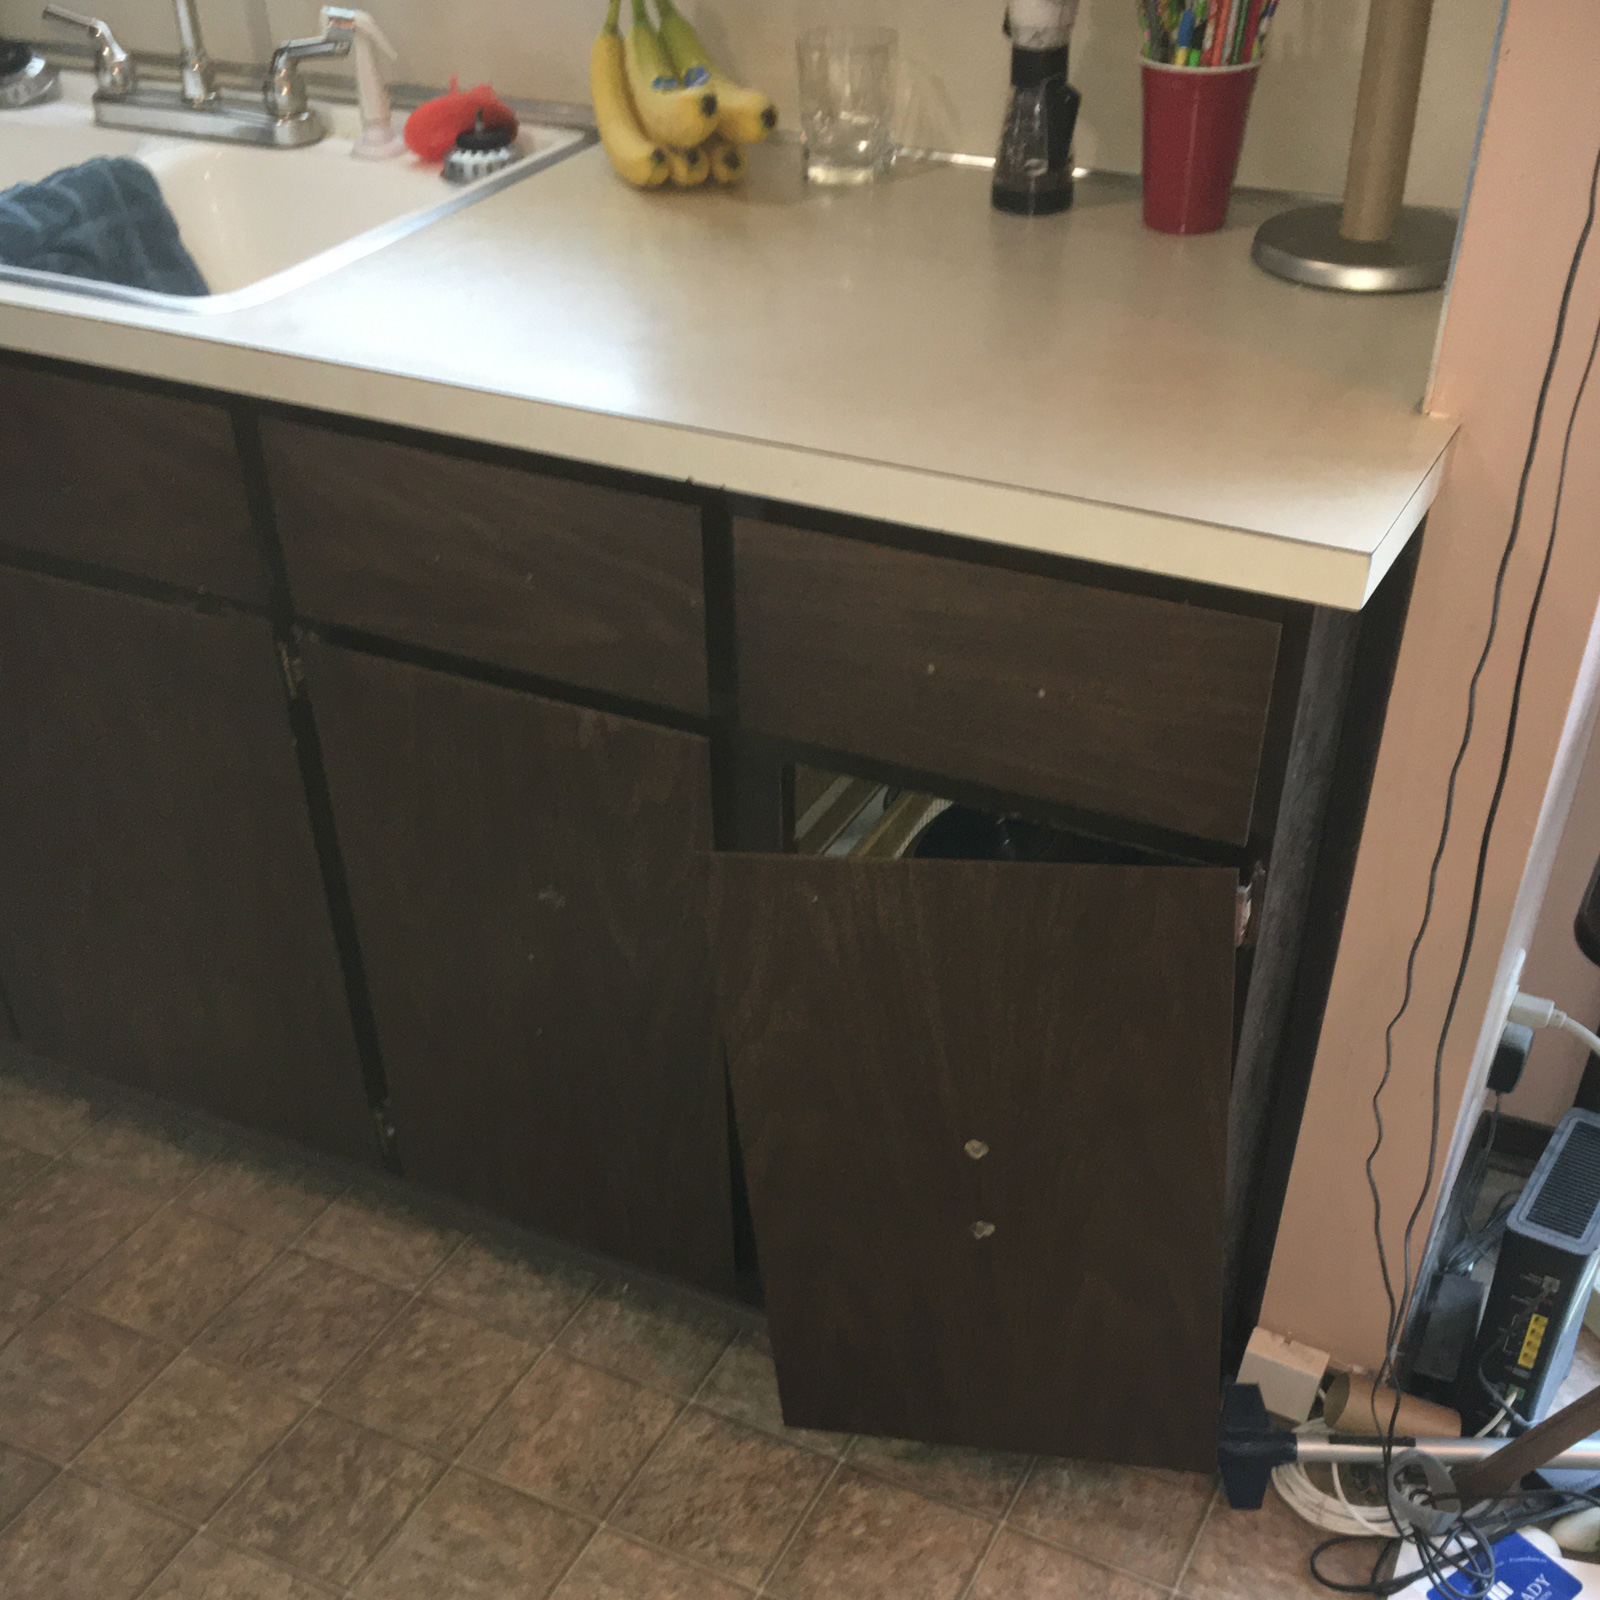 Entry 168 - Stuck in the 70's with beat up cabinetry